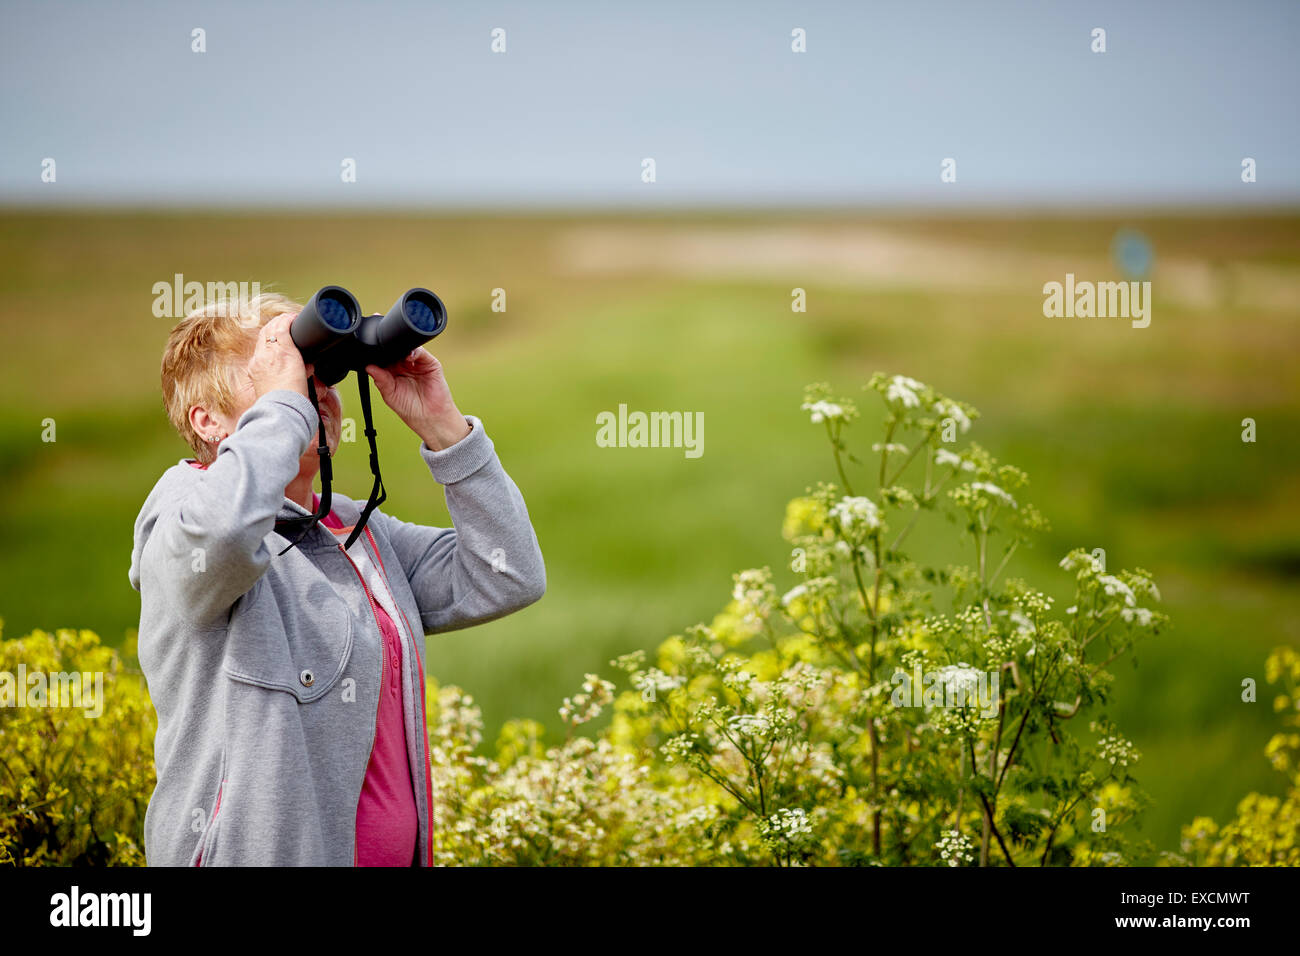 Pictures around Southport  looking at watching through binoculars Lady's ladies female girls hers  woman women she wife Stock Photo